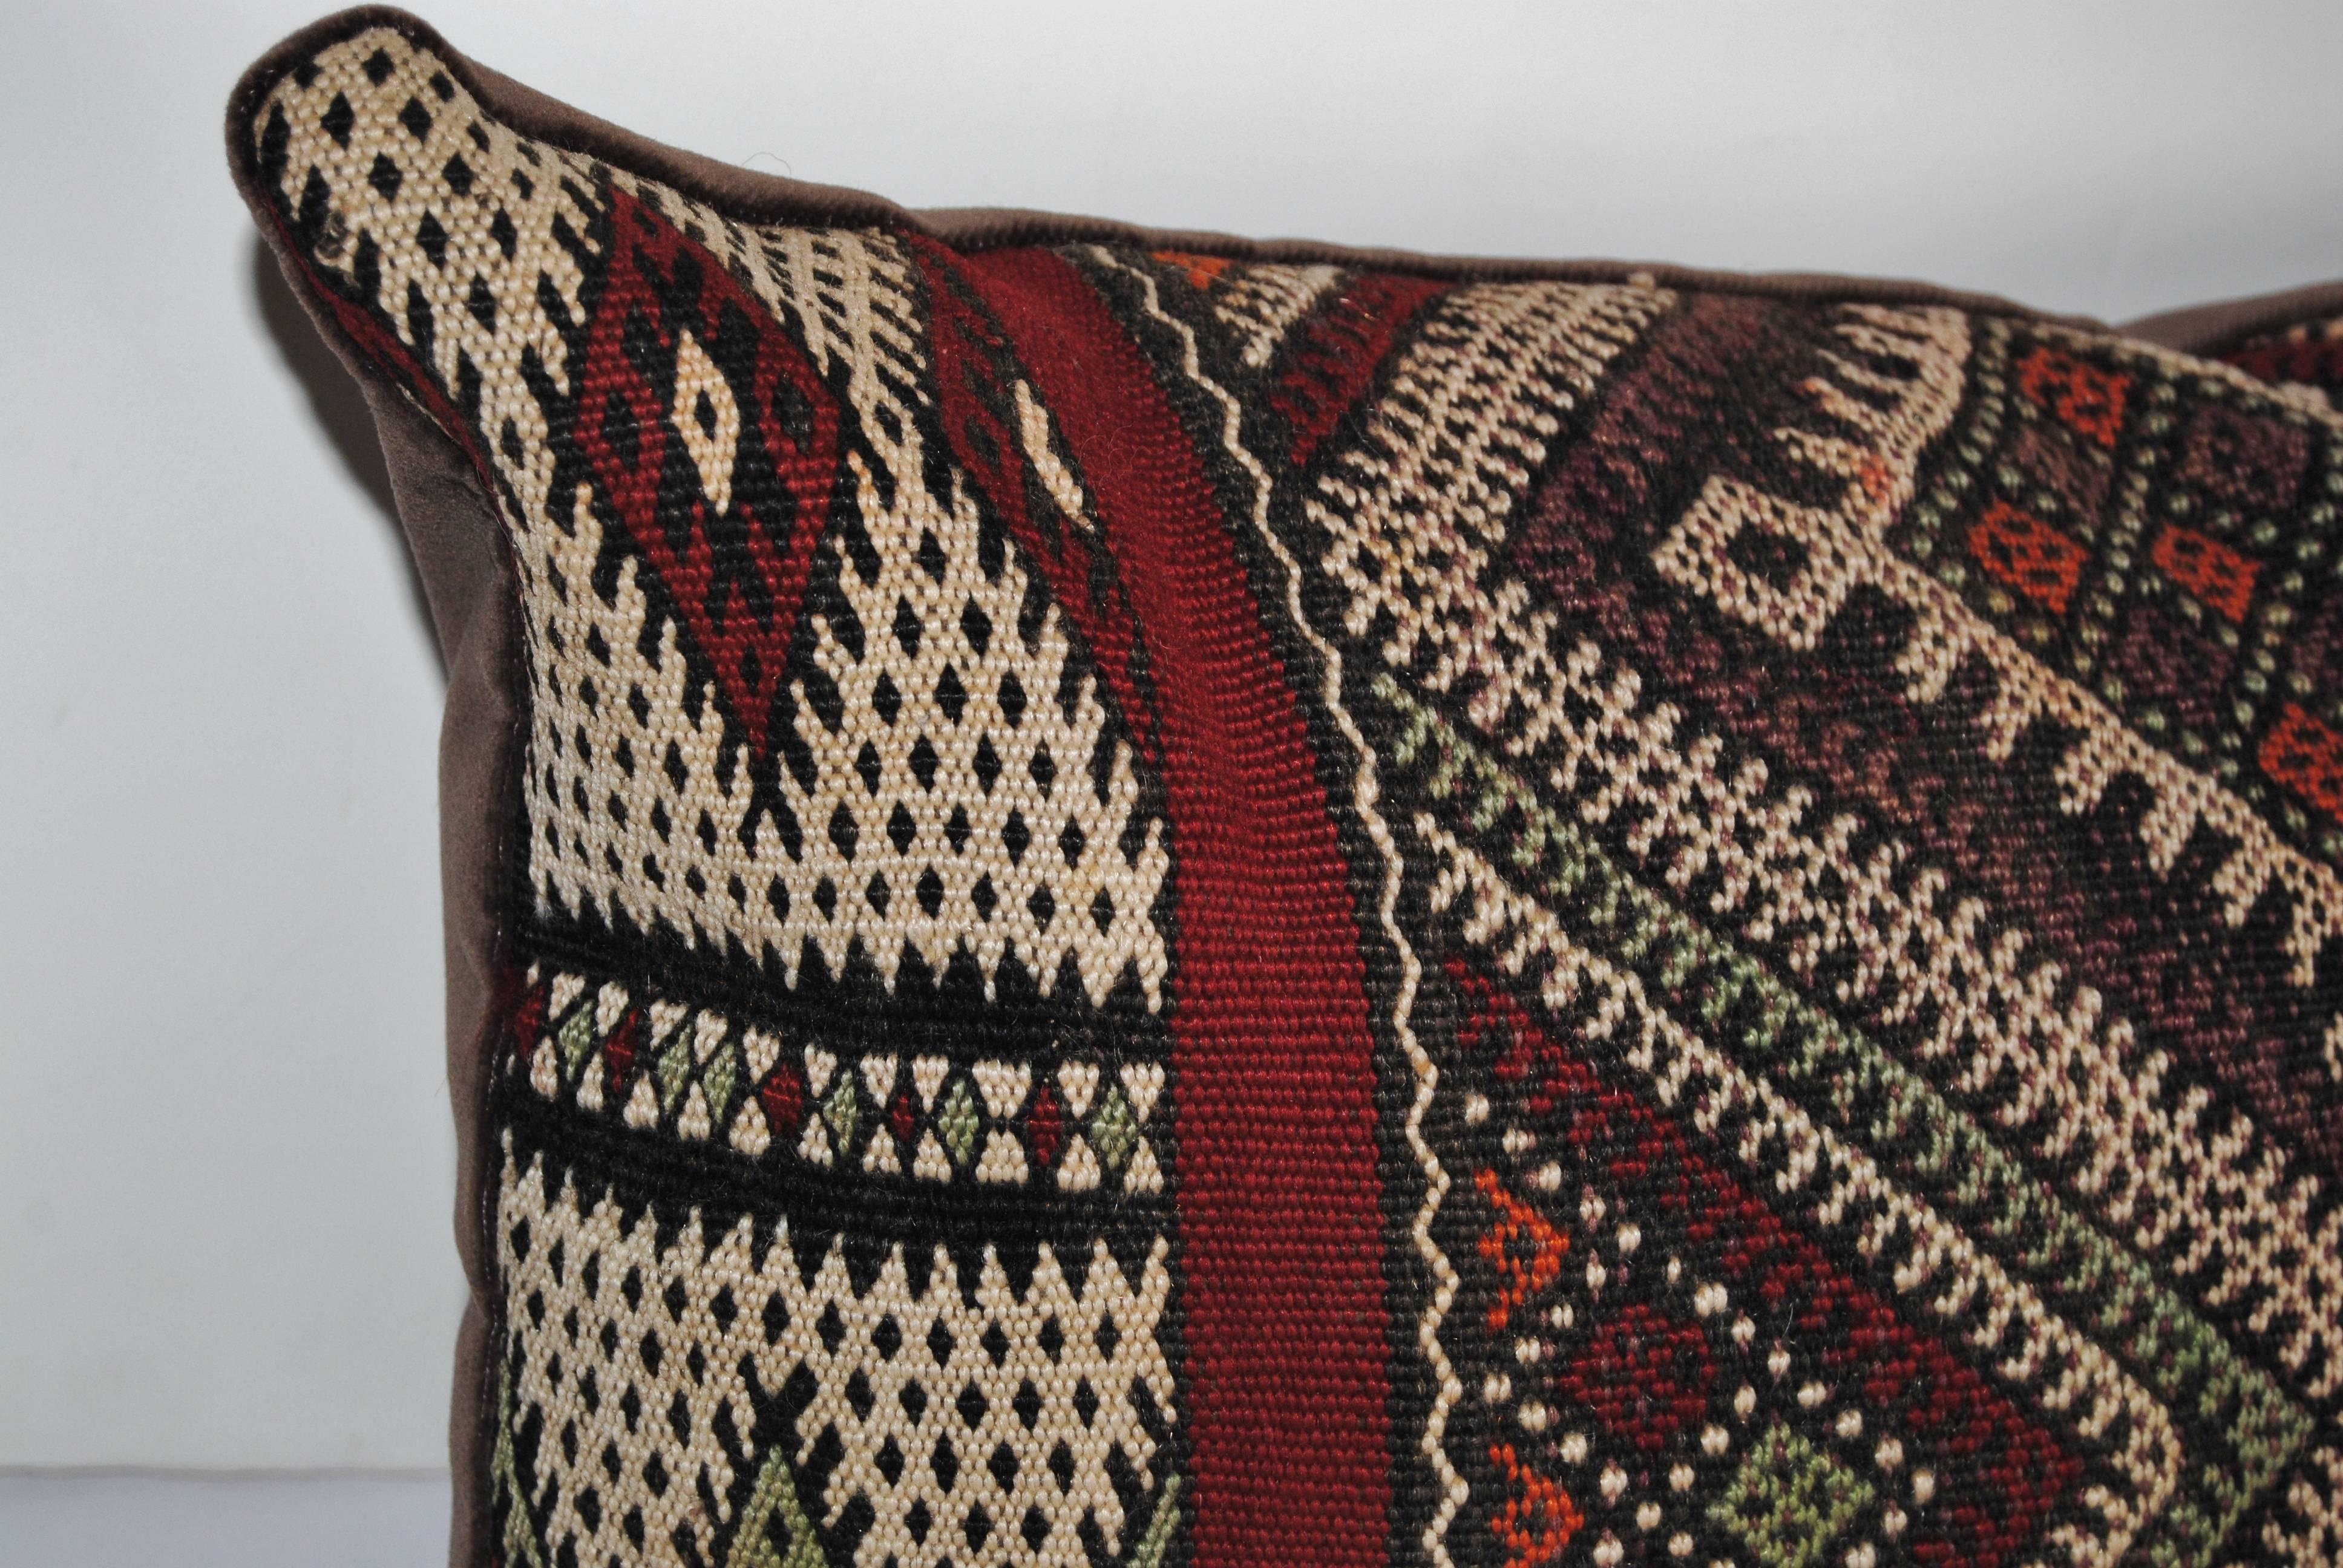 Custom pillow cut from a vintage hand loomed wool Moroccan Berber rug from the Atlas Mountains, wool is soft and lustrous with good color. Pillow is backed in a brown velvet, filled with an insert of 100% down and hand-sewn closed.
Pair available.